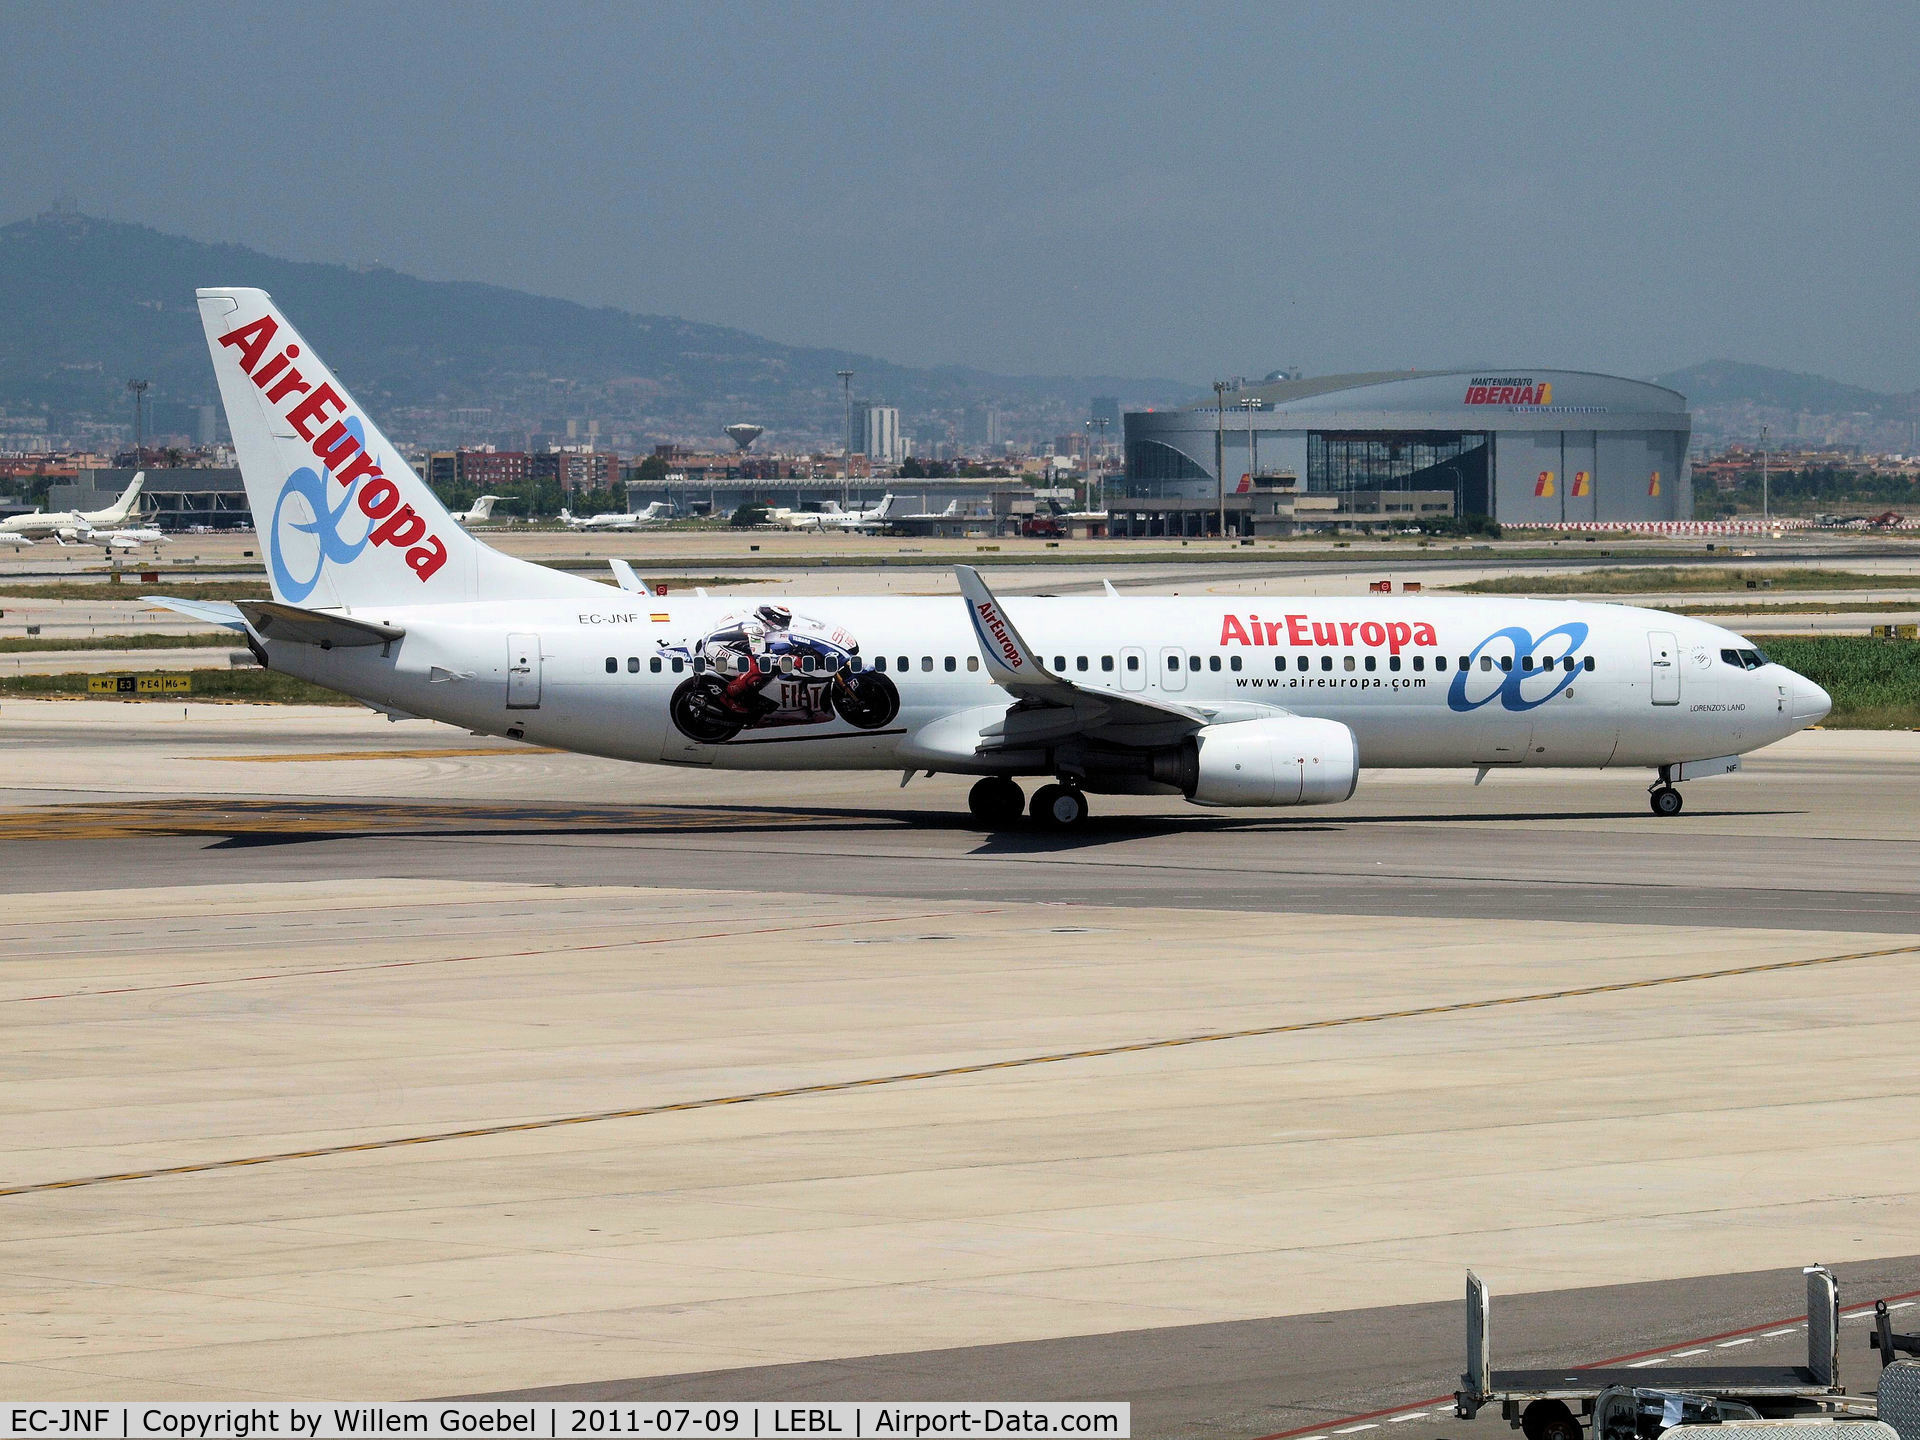 EC-JNF, 2006 Boeing 737-85P C/N 33977, Taxi to the runway of Barcelona Airport